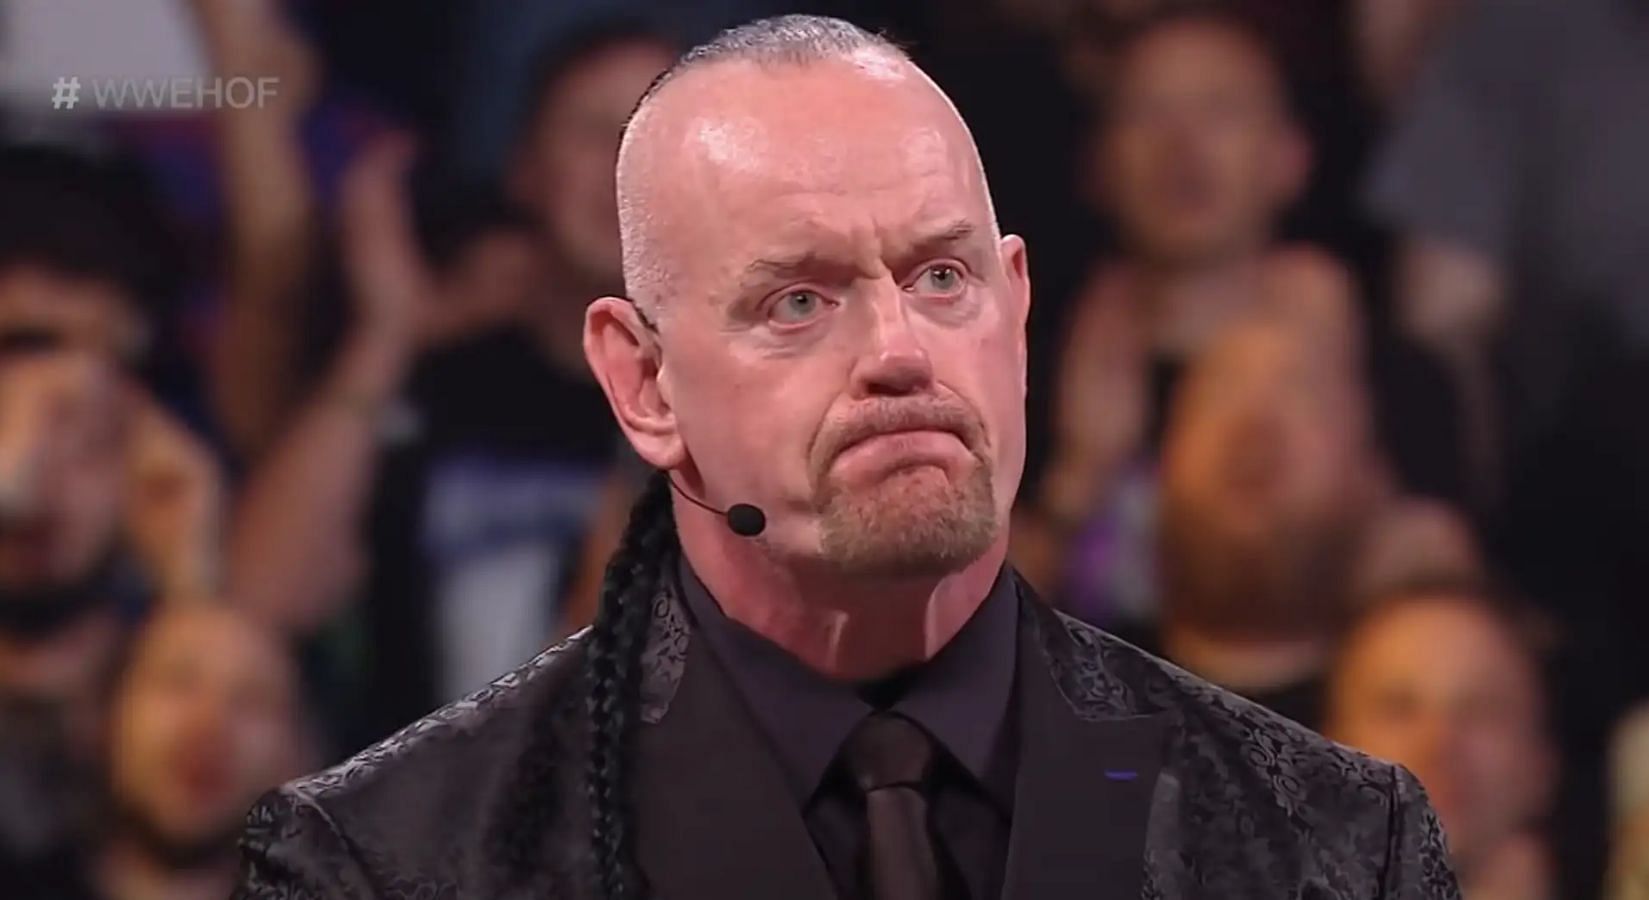 The Undertaker wrestled at high-profile events in the last few years of his career